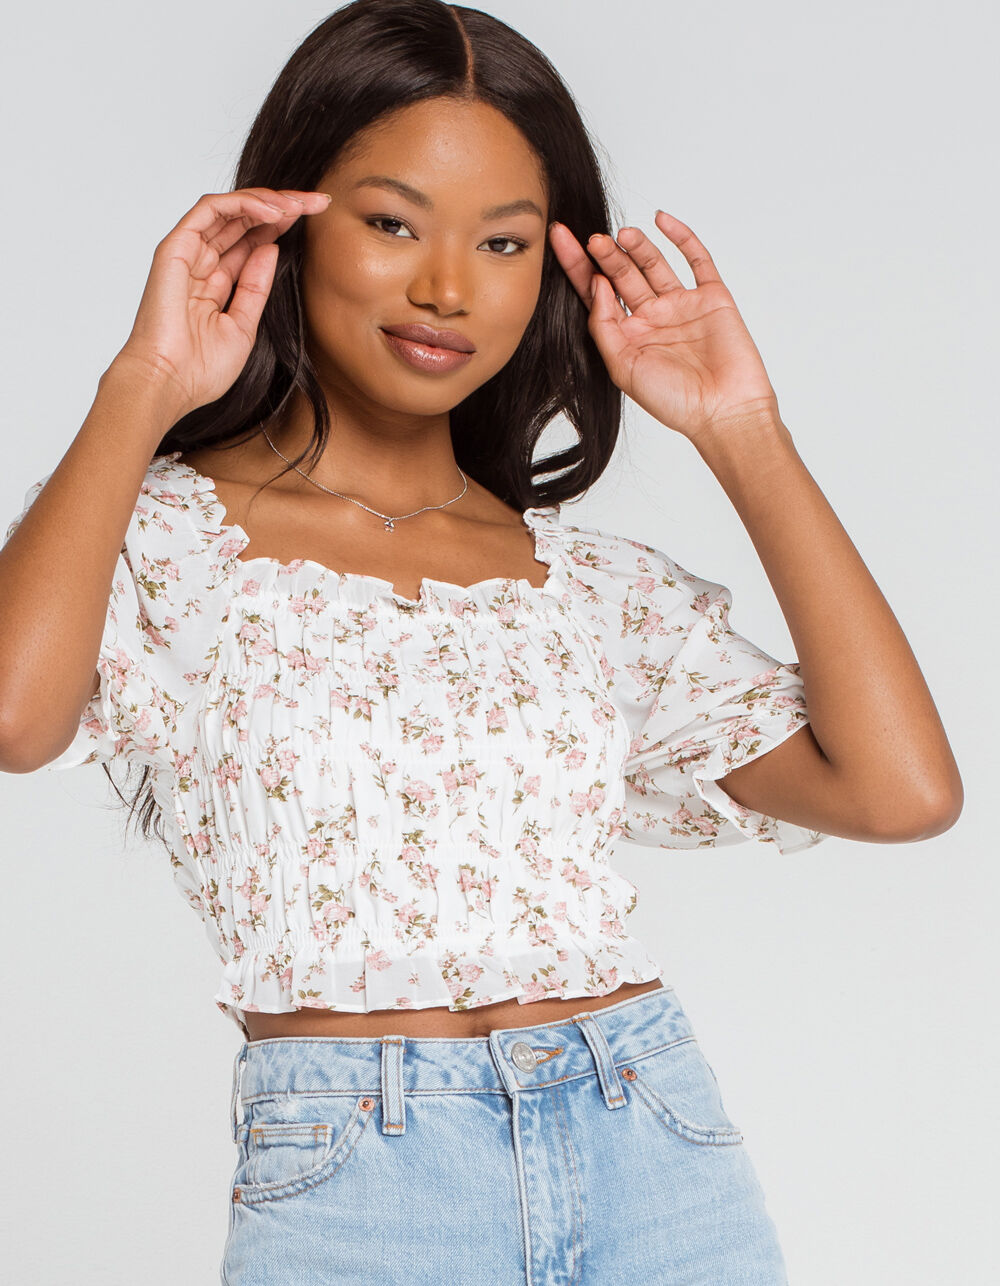 COTTON CANDY LA Smocked Floral Womens Top - WHITE COMBO | Tillys